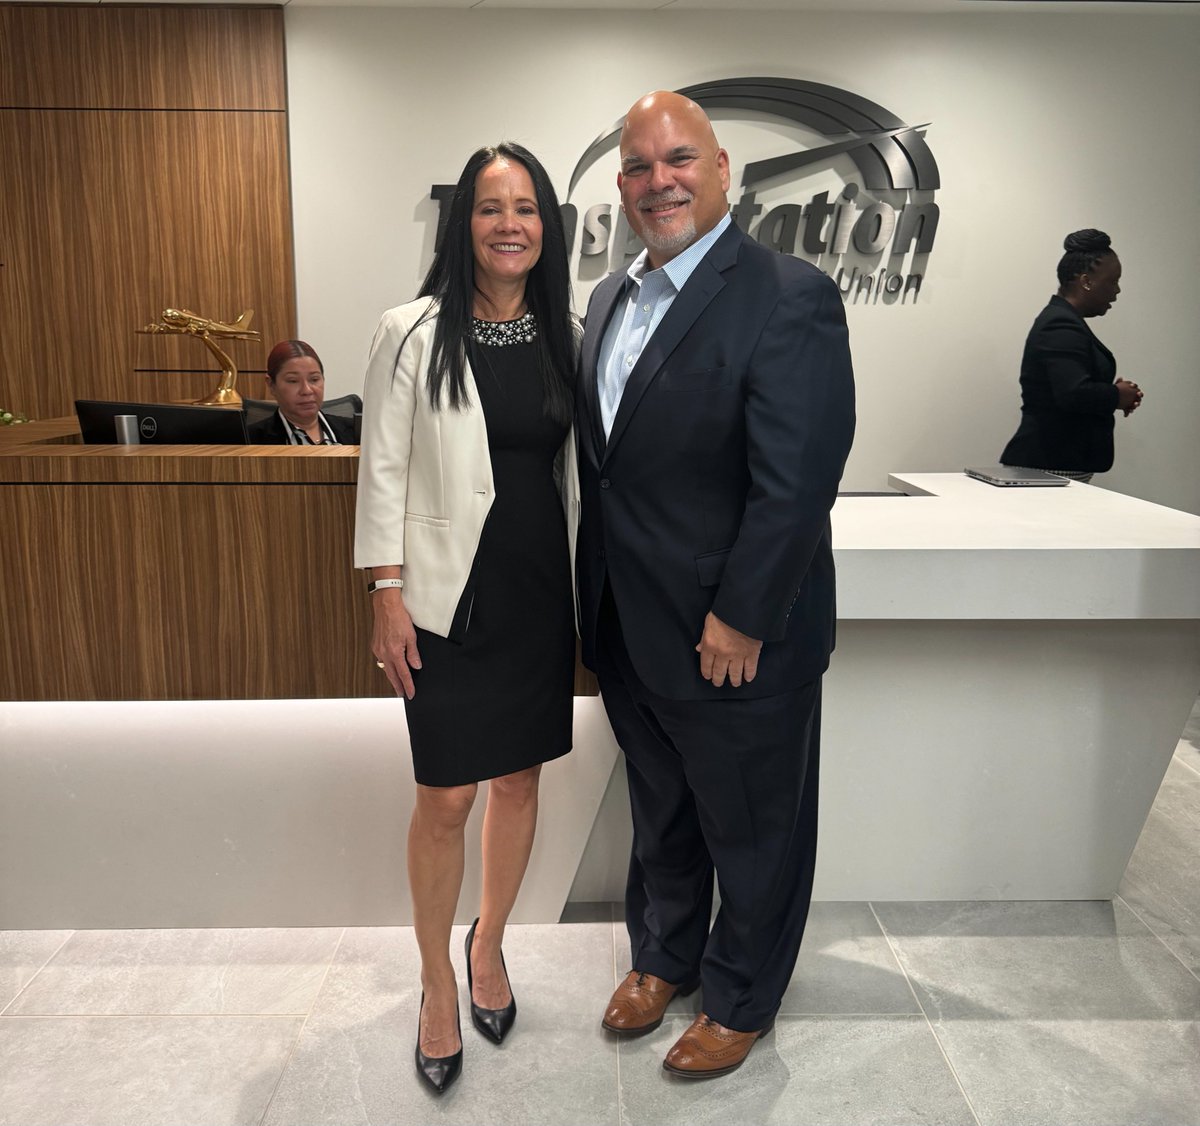 Thrilled to join @TransportFCU for the grand opening of its newly remodeled headquarters in Alexandria, which now includes a branch! Congratulations to President & CEO MJ Neusaenger & team on the new digs and on the credit union's 85th anniversary! @AmericasCUs